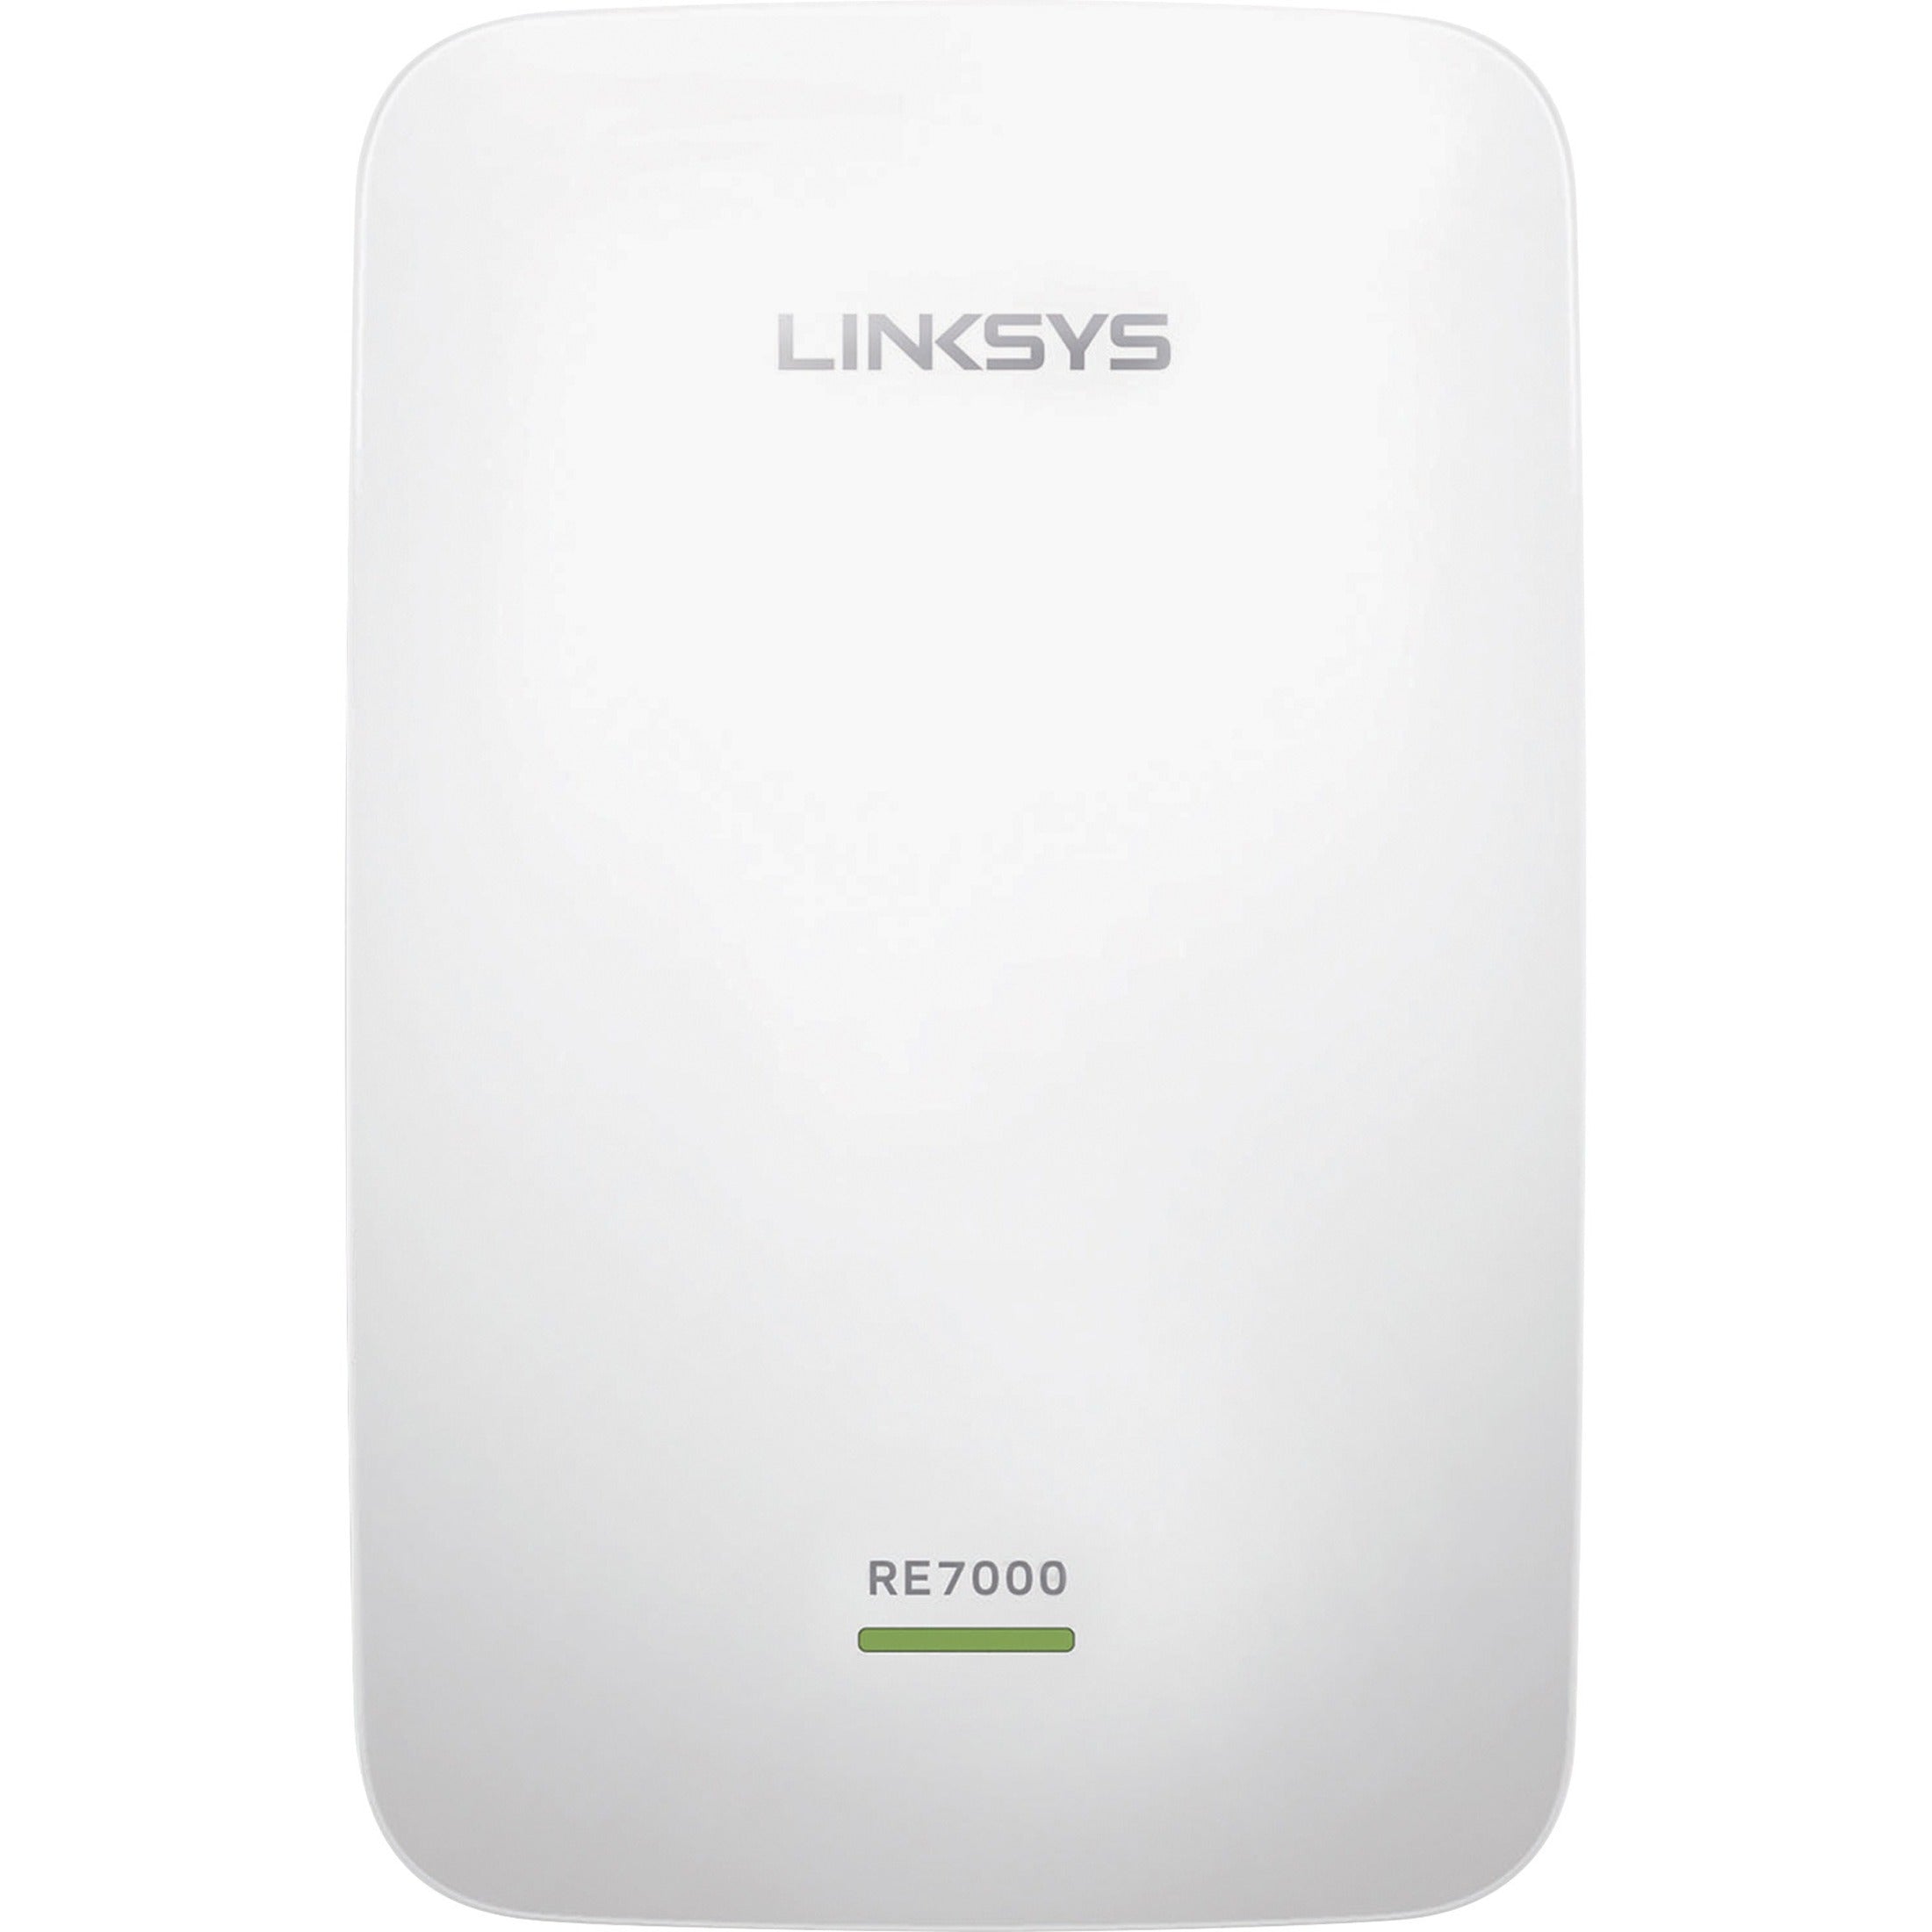 Linksys RE7000 Max Stream AC1900 MU-MIMO Range Extender, Extend Your Wi-Fi Signal for Faster Internet Speeds [Discontinued]